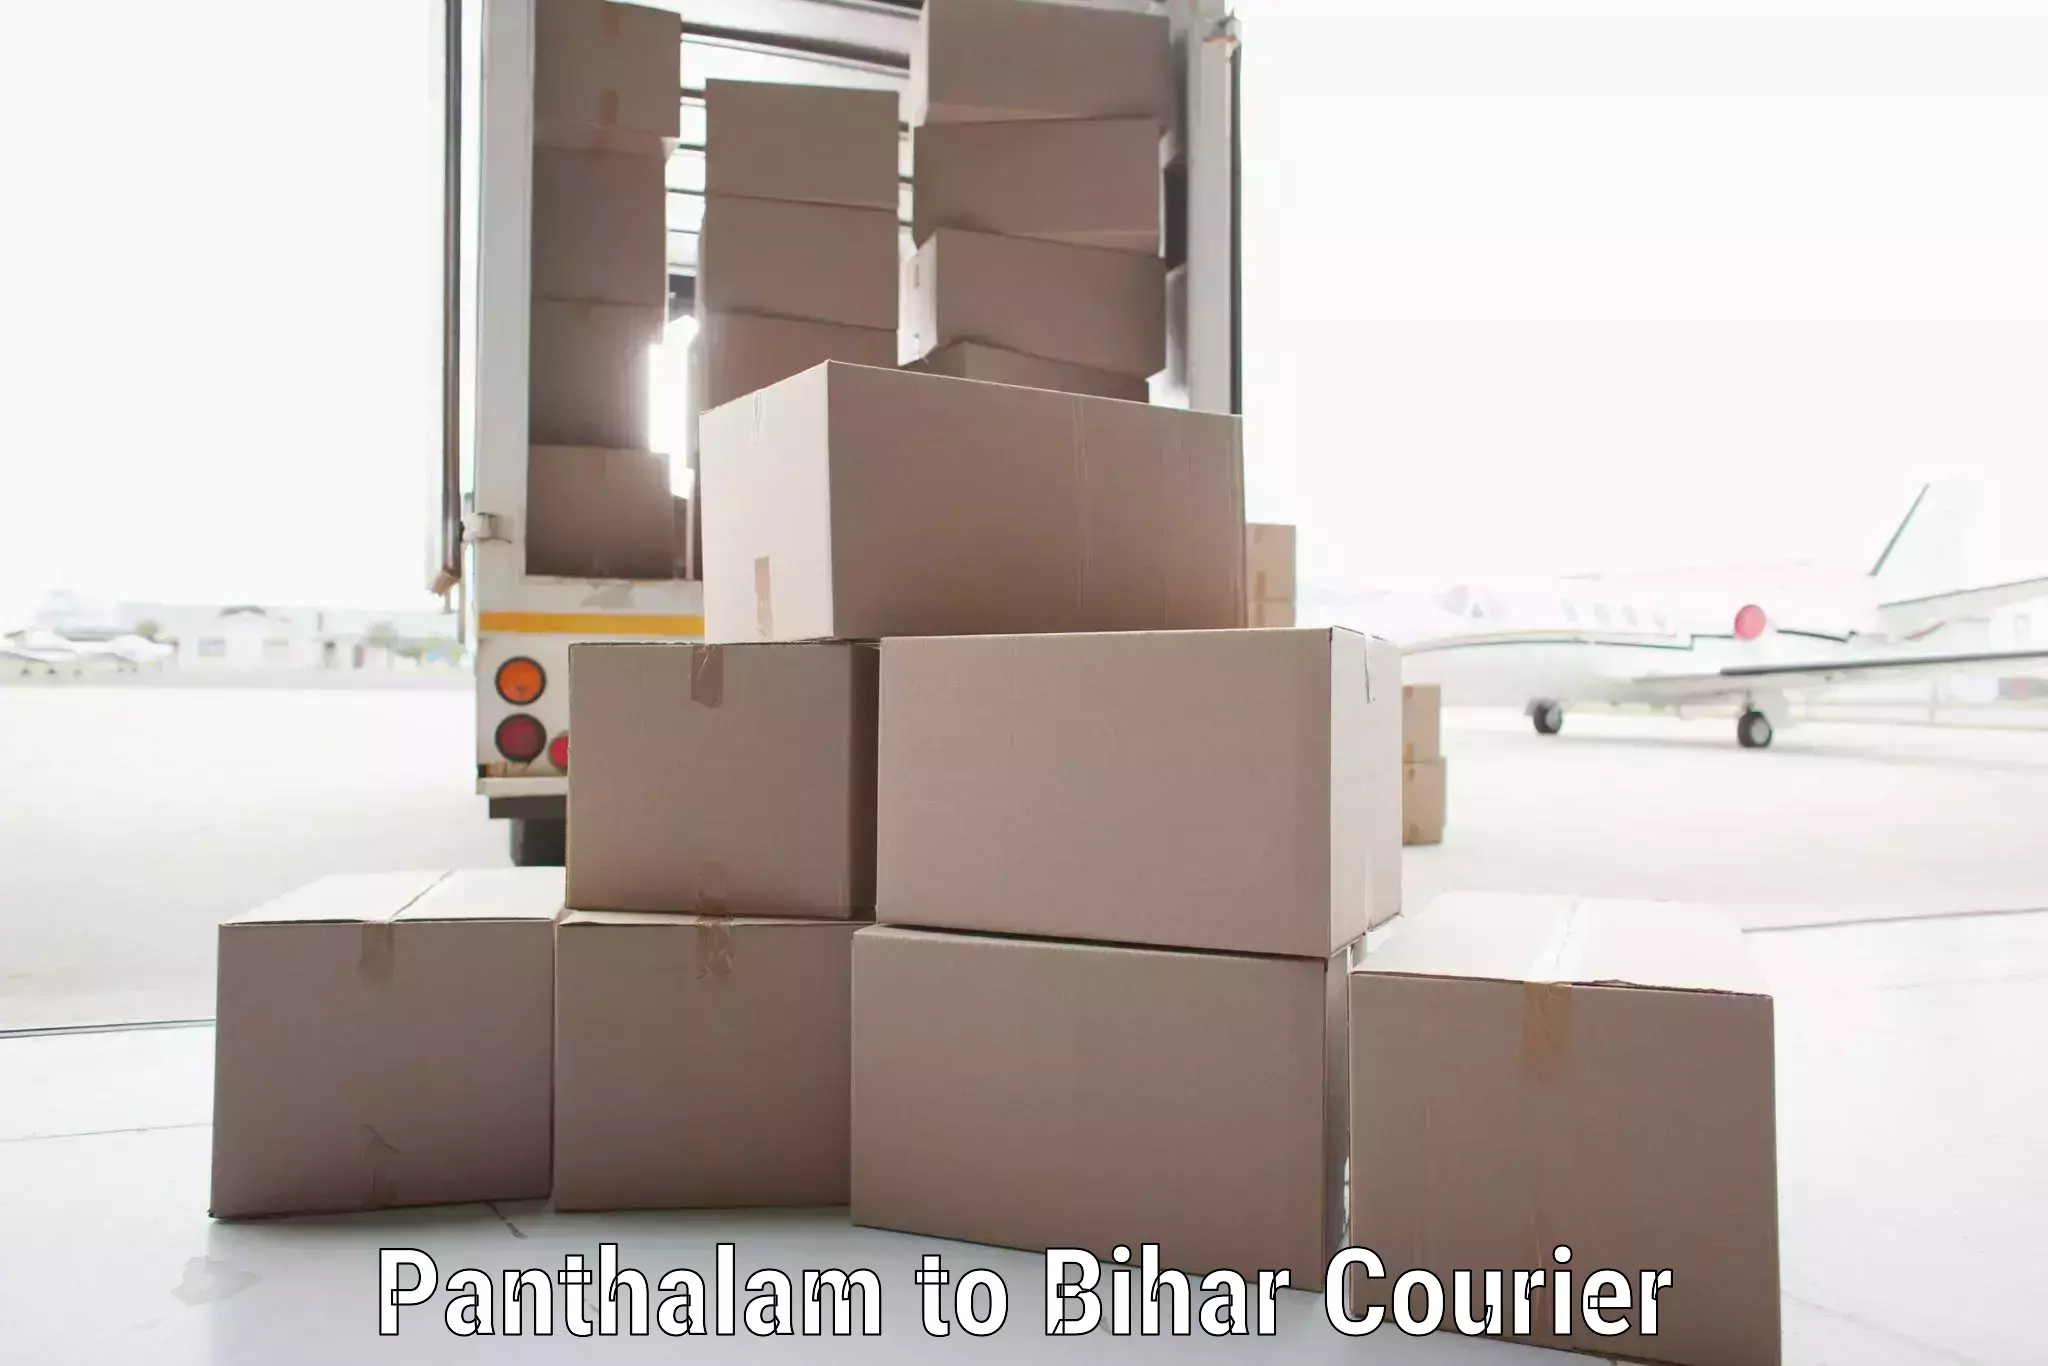 End-to-end delivery Panthalam to Dhaka